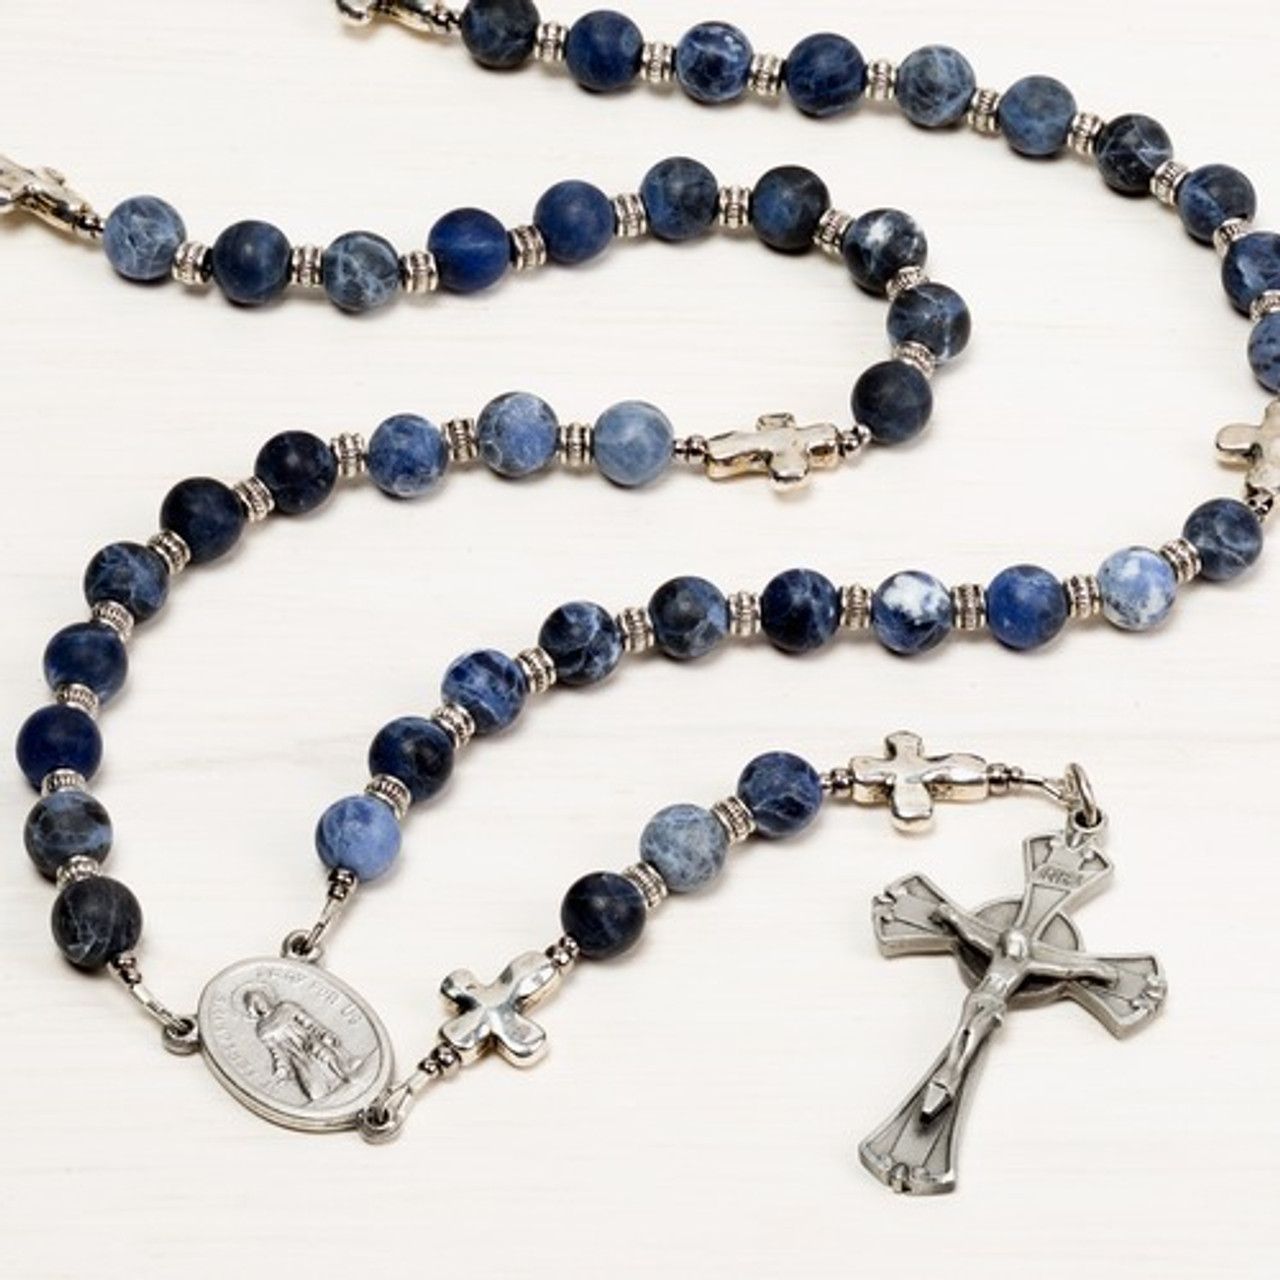 Hand-Crafted Catholic Rosary Bracelets - Our Lady's Rose Garden